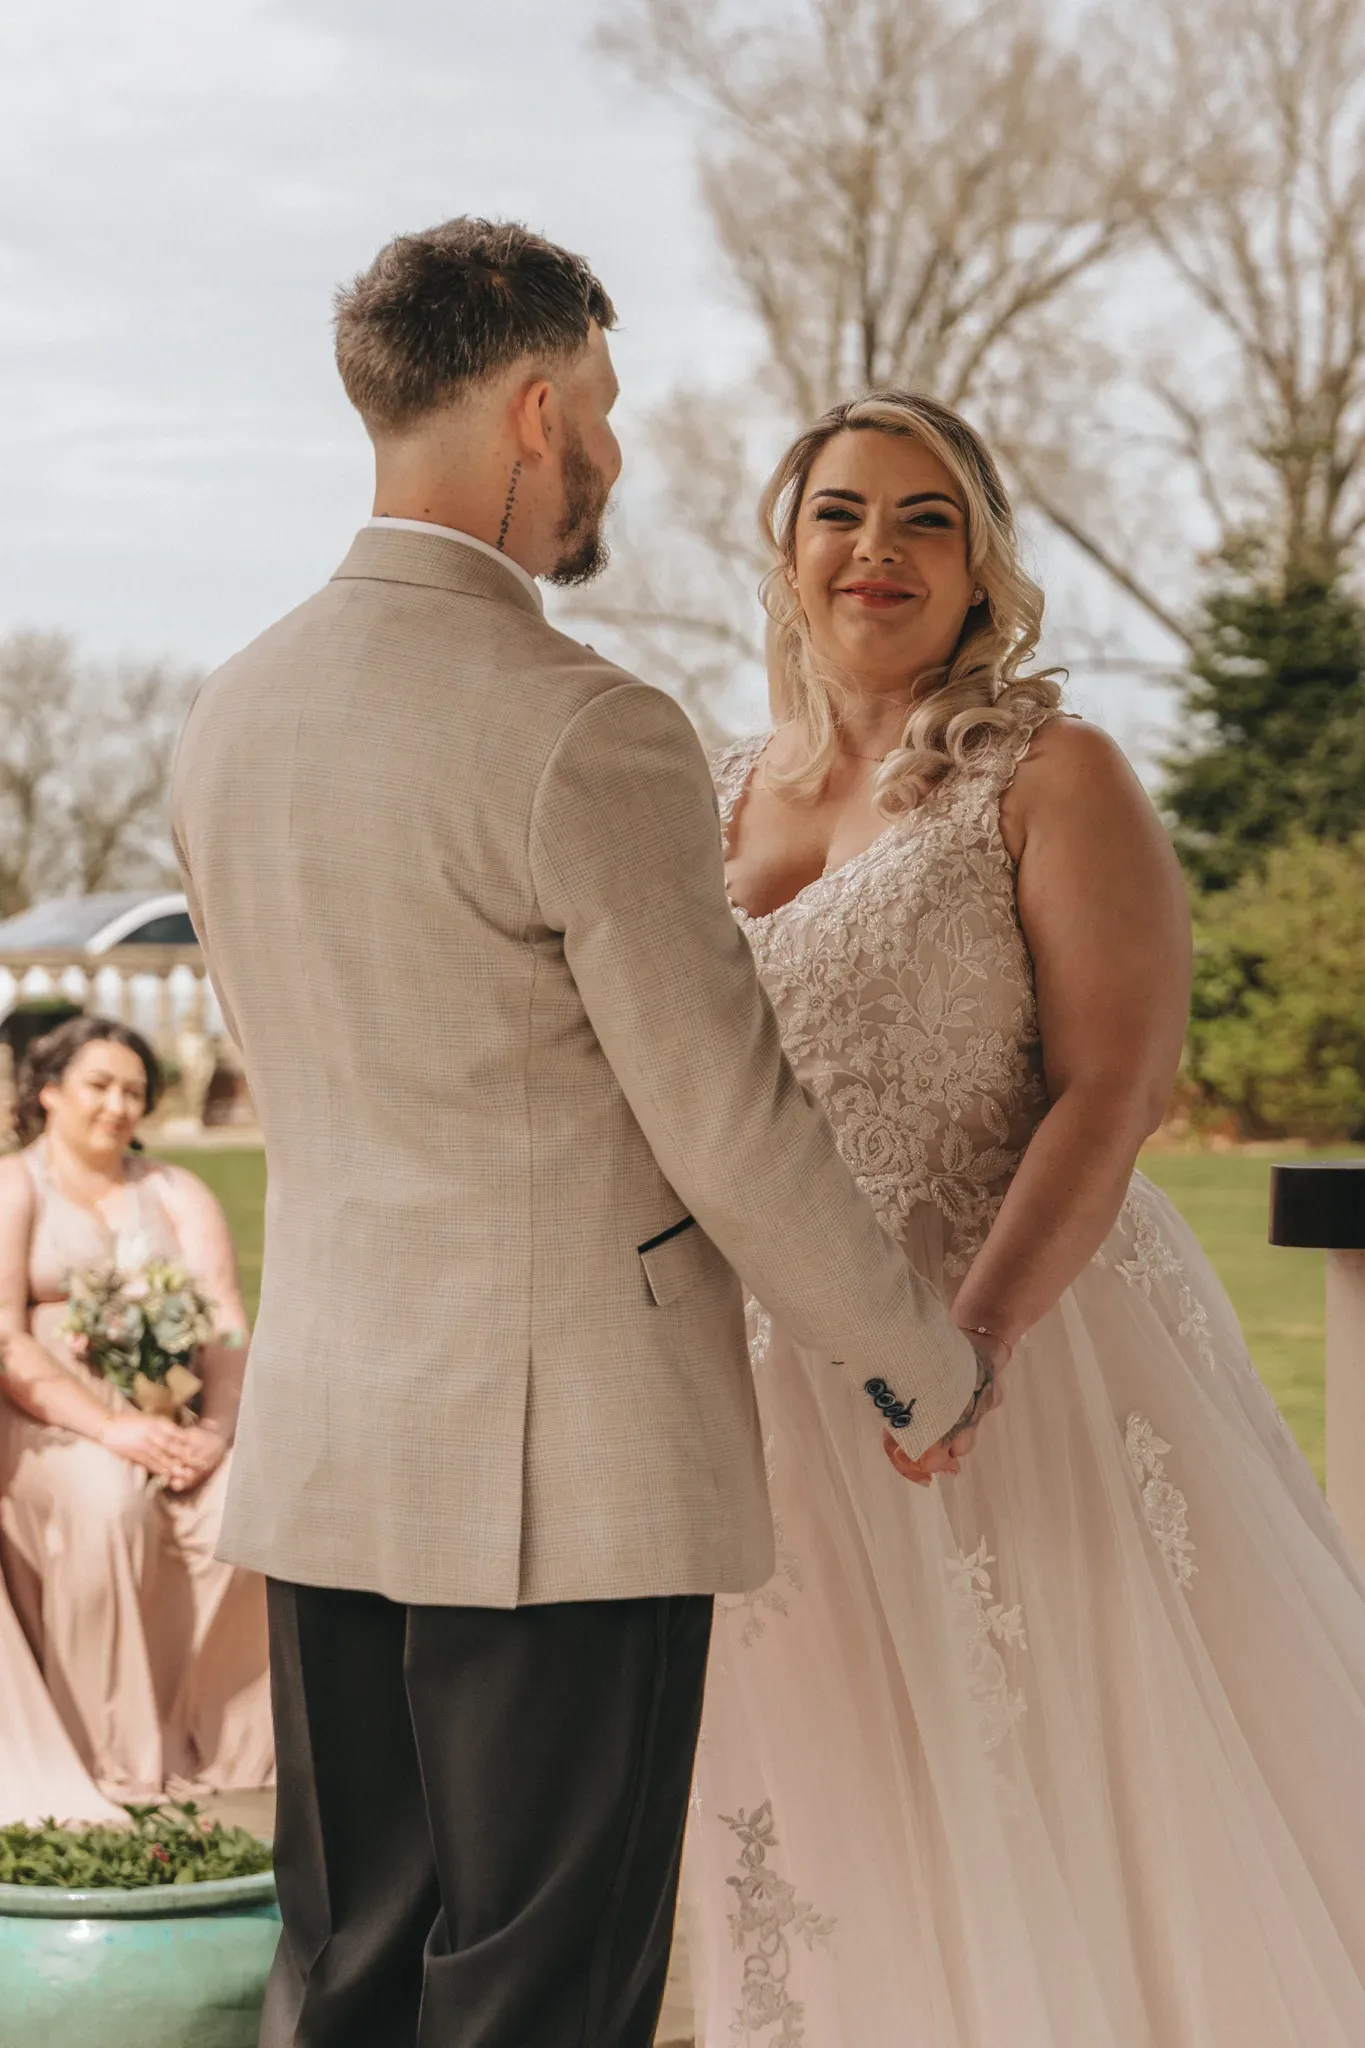 A bride and groom stand facing each other during a wedding ceremony. the bride, in a lace gown, smiles while the groom, in a beige suit, stands with his back to the camera. a bridesmaid in a pink dress observes from behind.